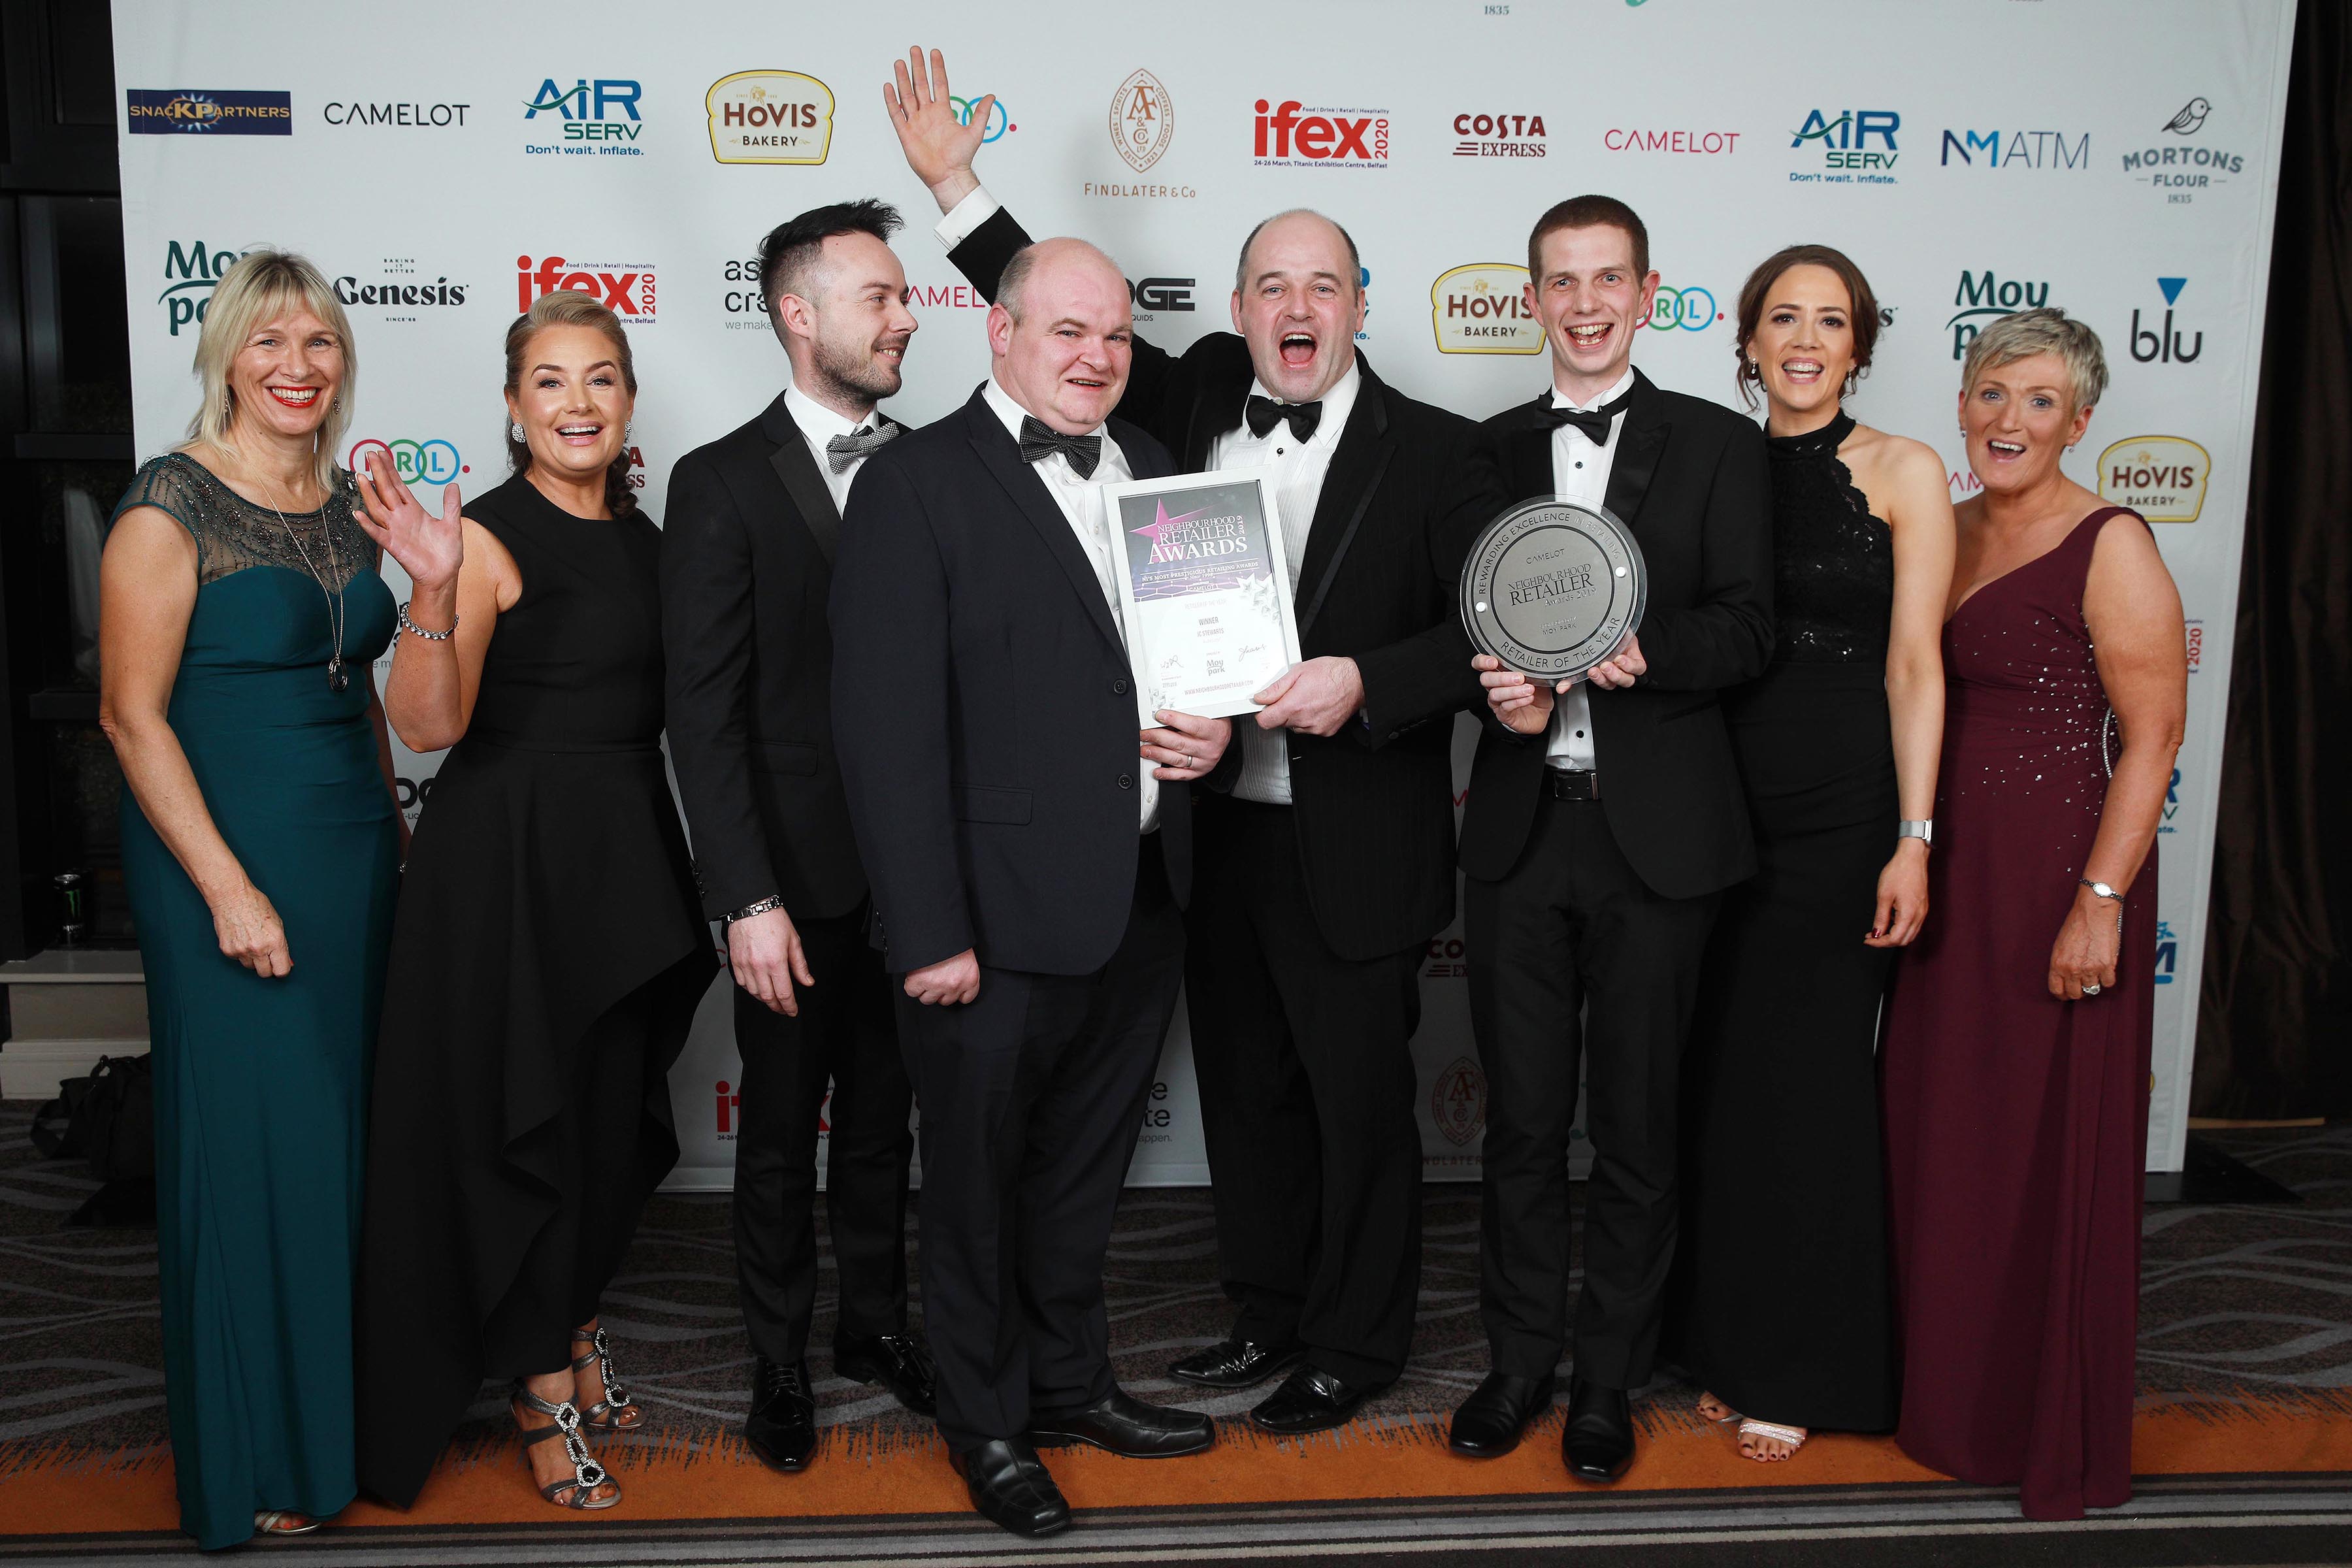 Northern Ireland’s leading retailers recognised at prestigious awards